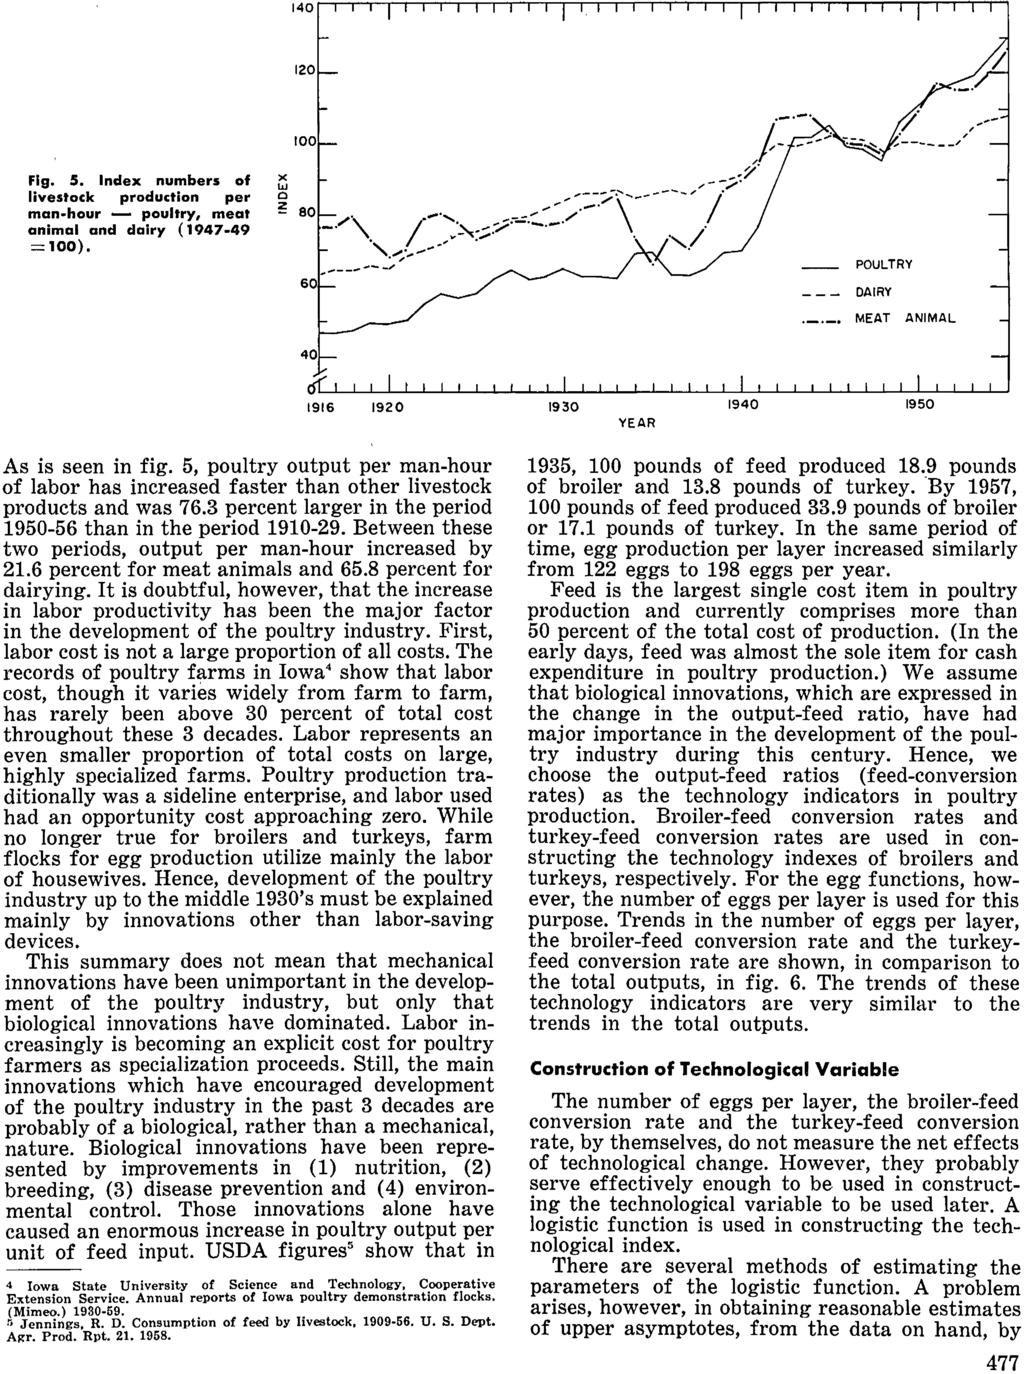 120 Fig. 5. Index numbers f livestck prductin per man-hur - pultry, meat animal and dairy (1947-49 =100). POULTRY DAIRY MEAT ANIMAL 1916 1920 1930 1940 YEAR 1950 As is seen in fig.